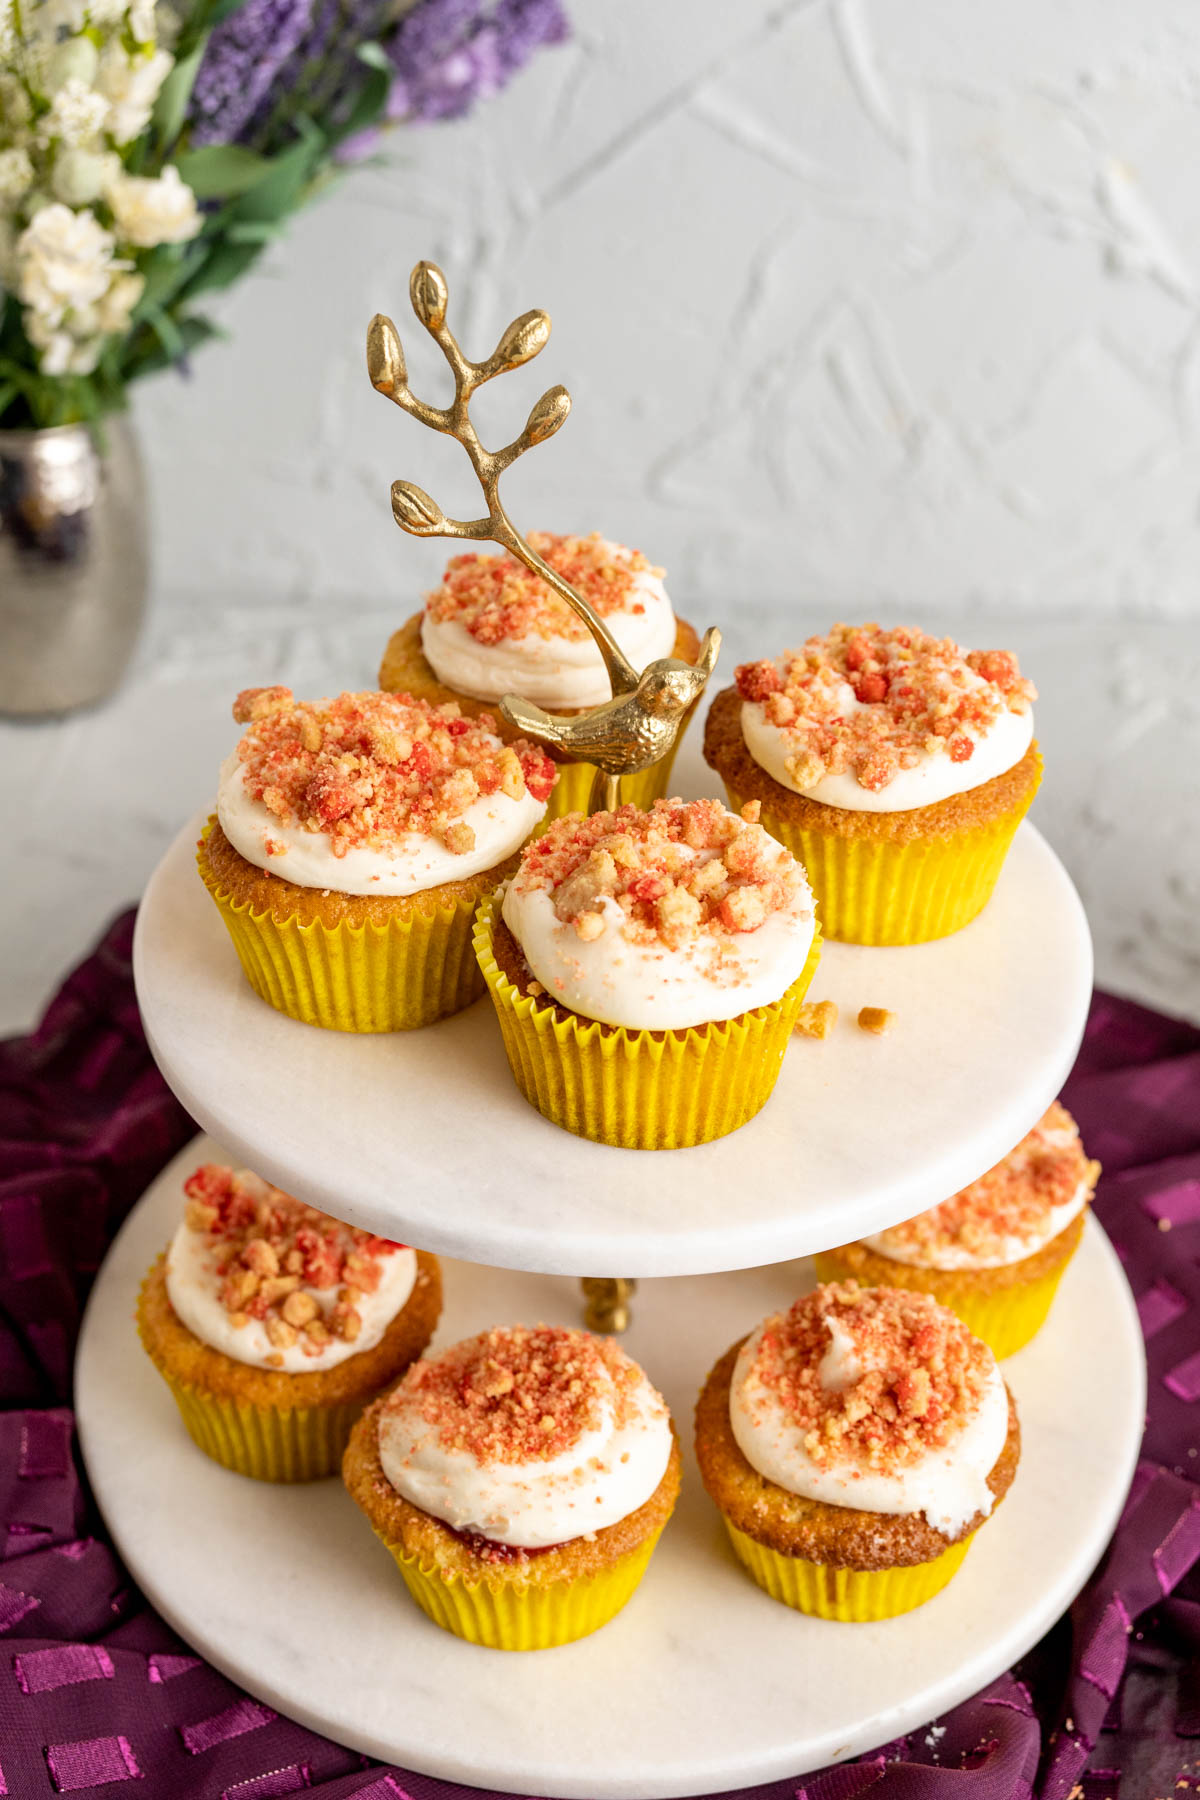 strawberry crunch cupcakes on a white cupcake stand with flowers in the backdrop.